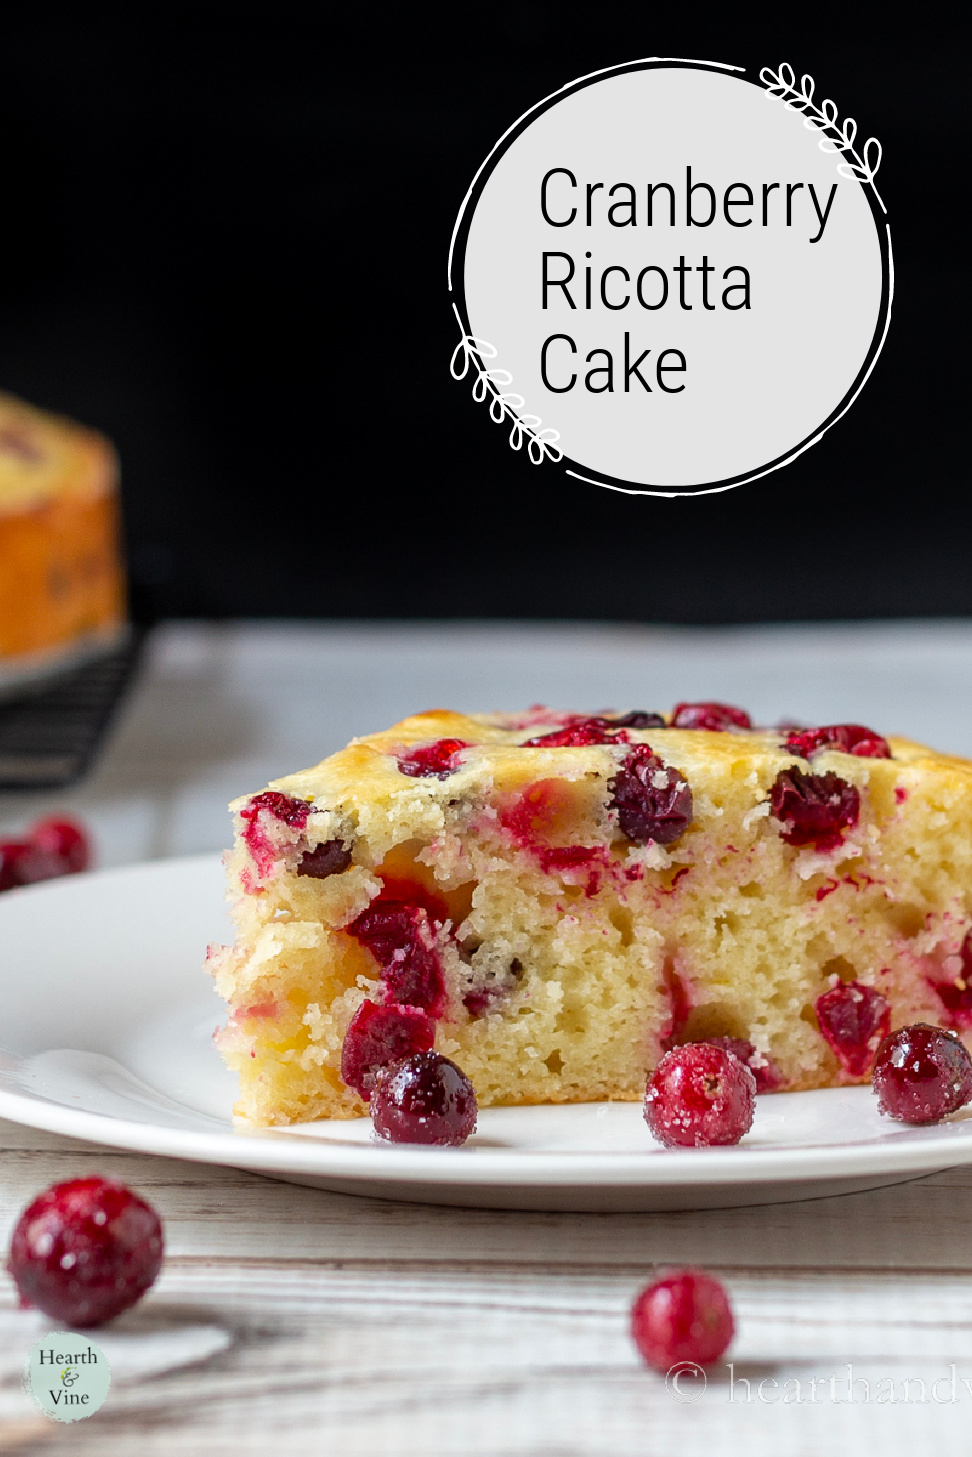 Slice of cranberry cake with sugared cranberries scattered around.